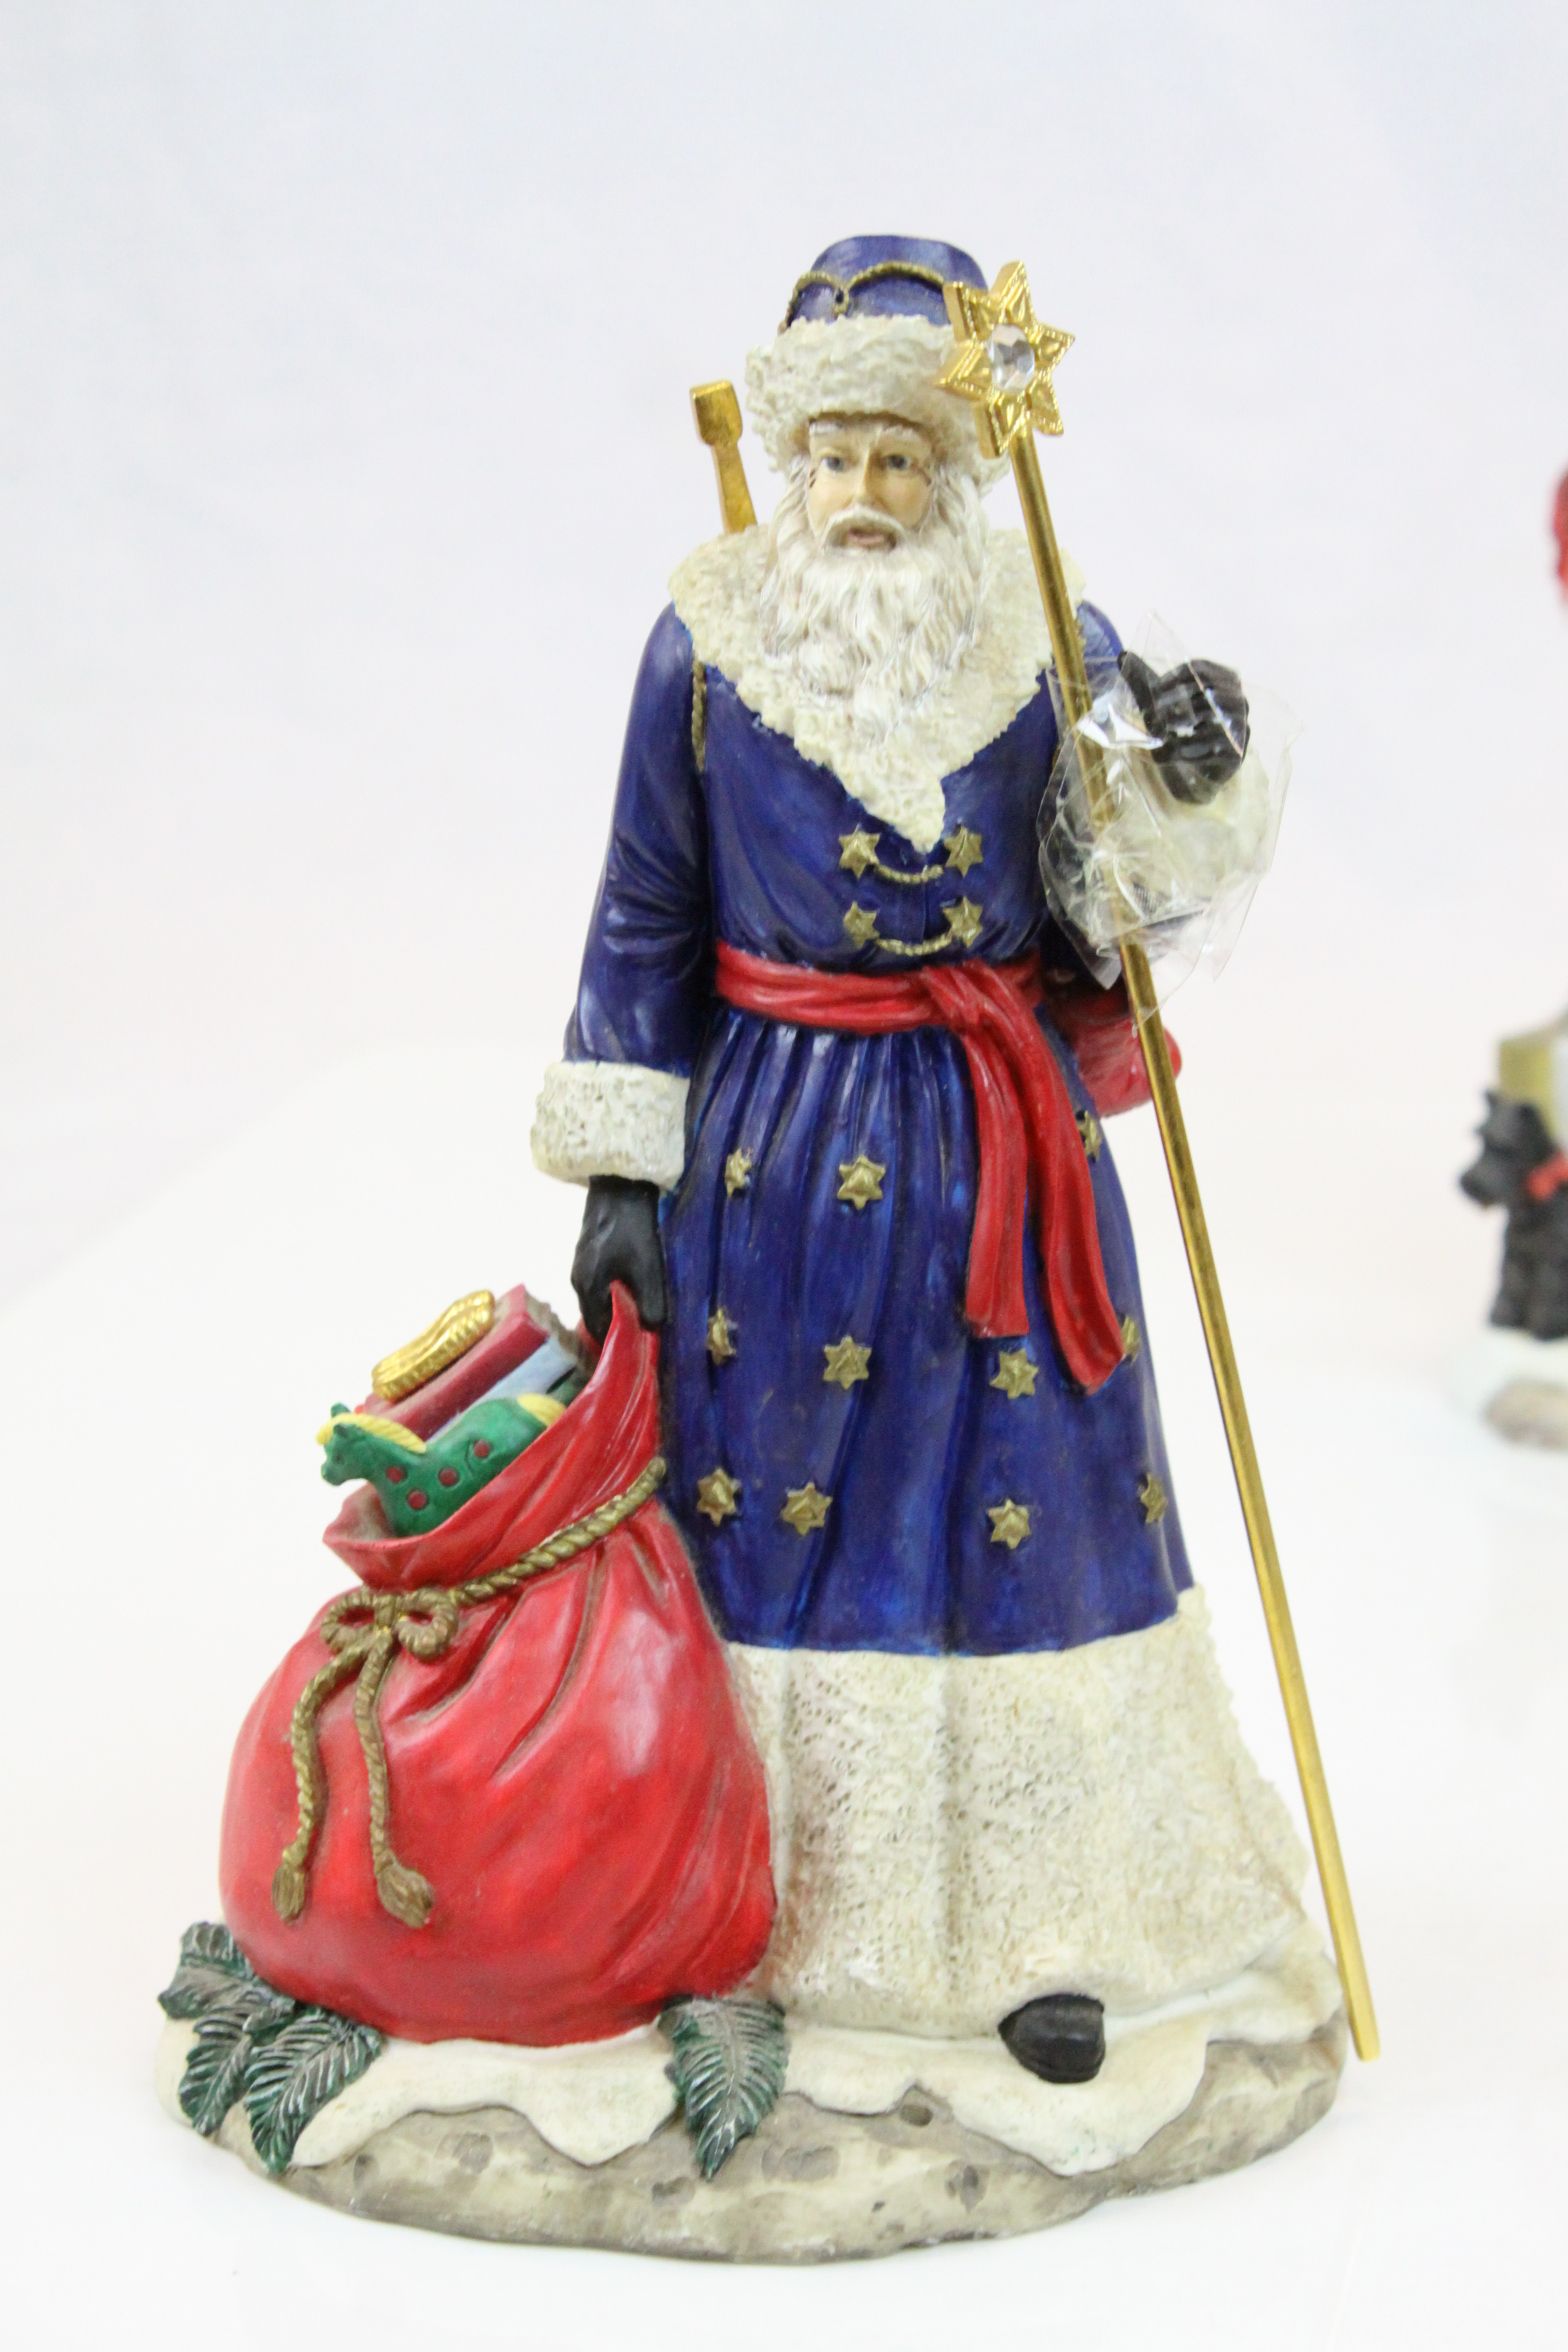 Hamilton Collection set of eight figures from the "International Santa" collection, accented with - Image 4 of 10